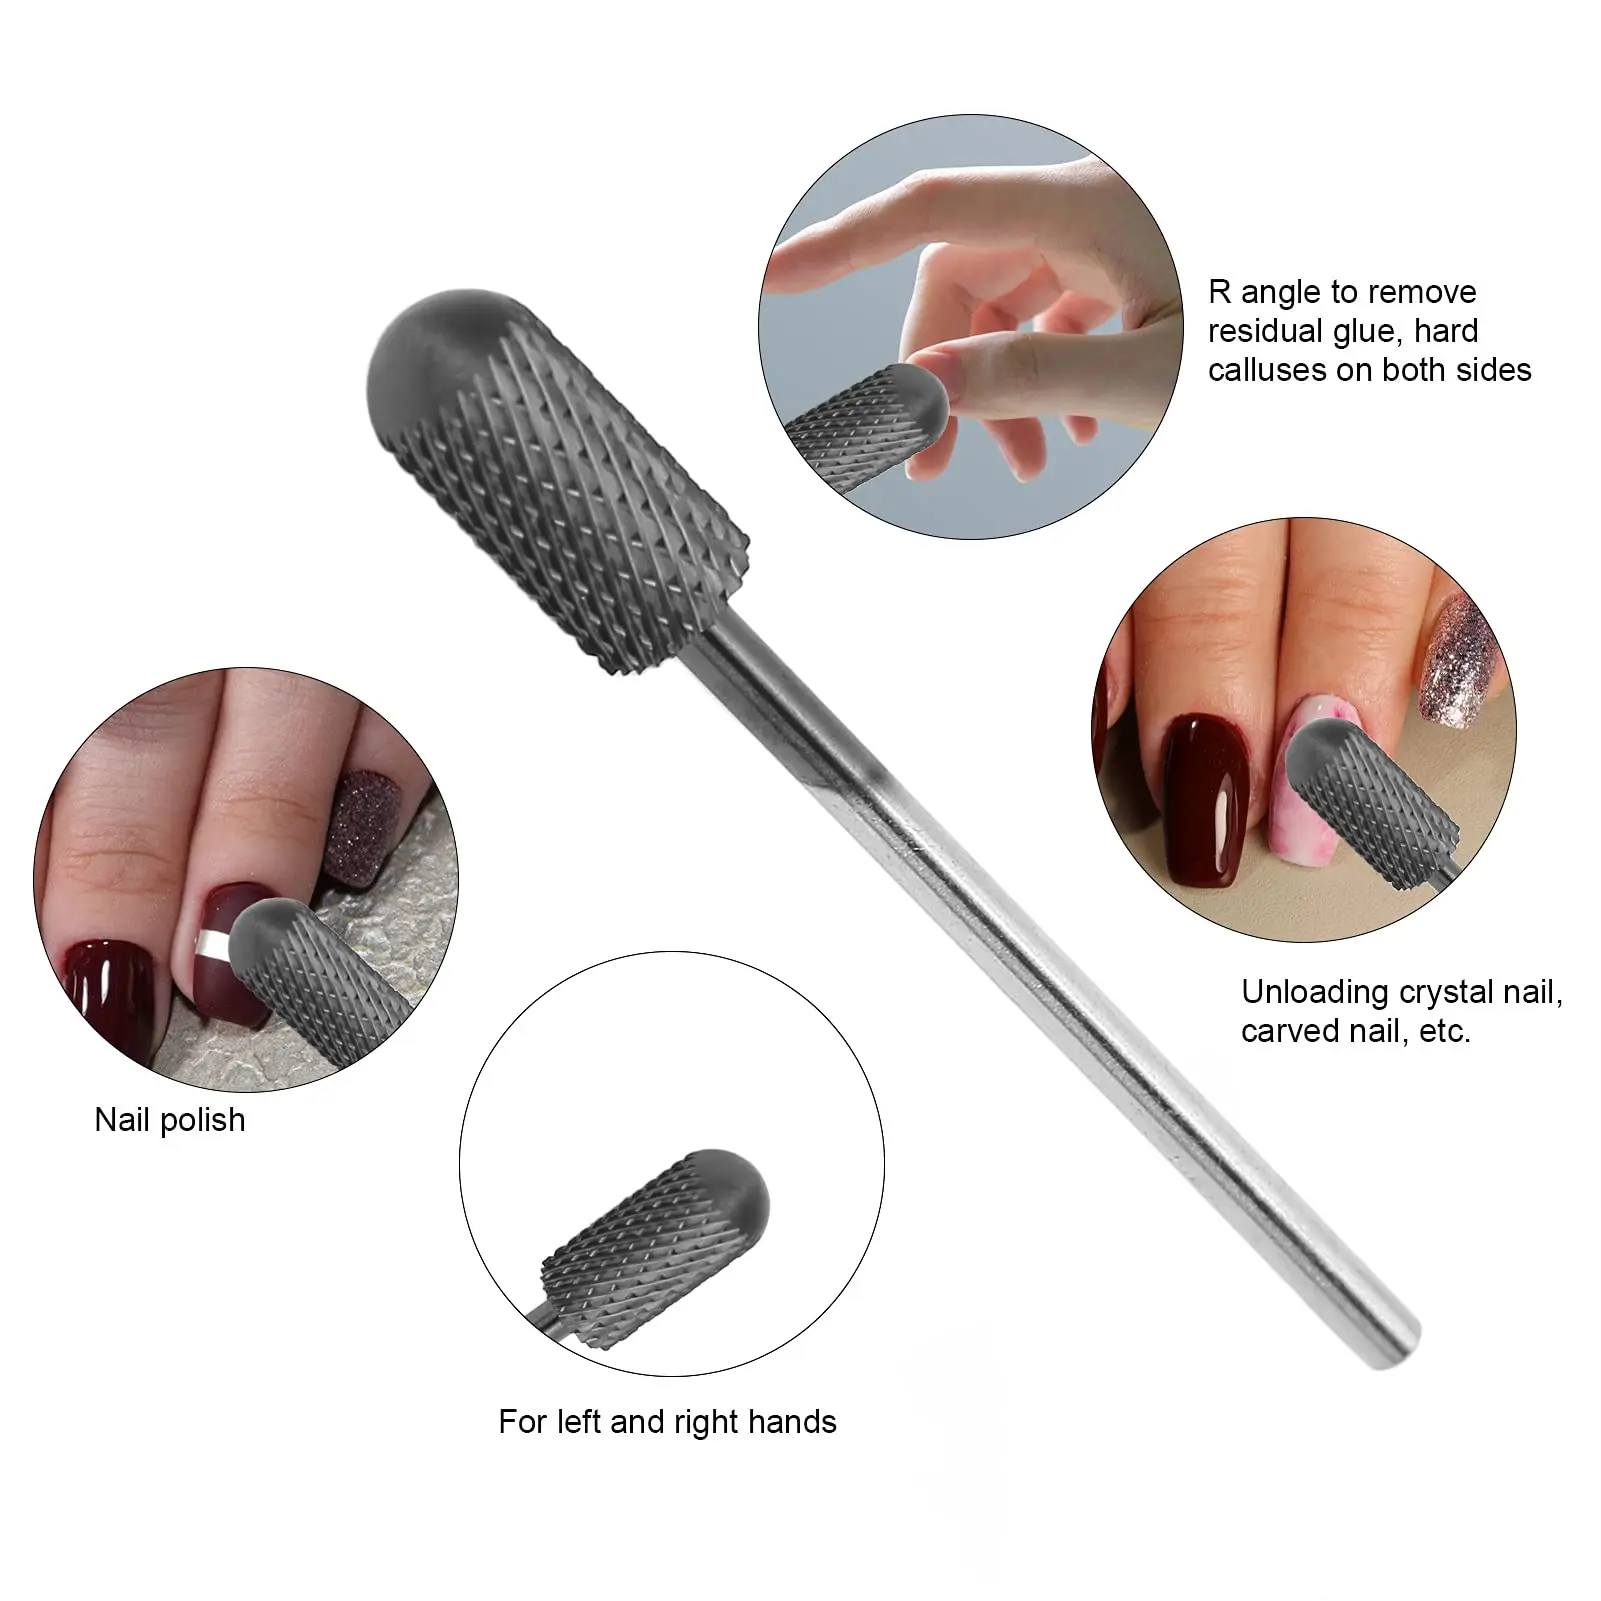 Black Tungsten Steel Nail Polishing Grinding Head, Nail Dead Skin Removal Tool, Nail Drill Bits for Nail Beauty Salon or Home